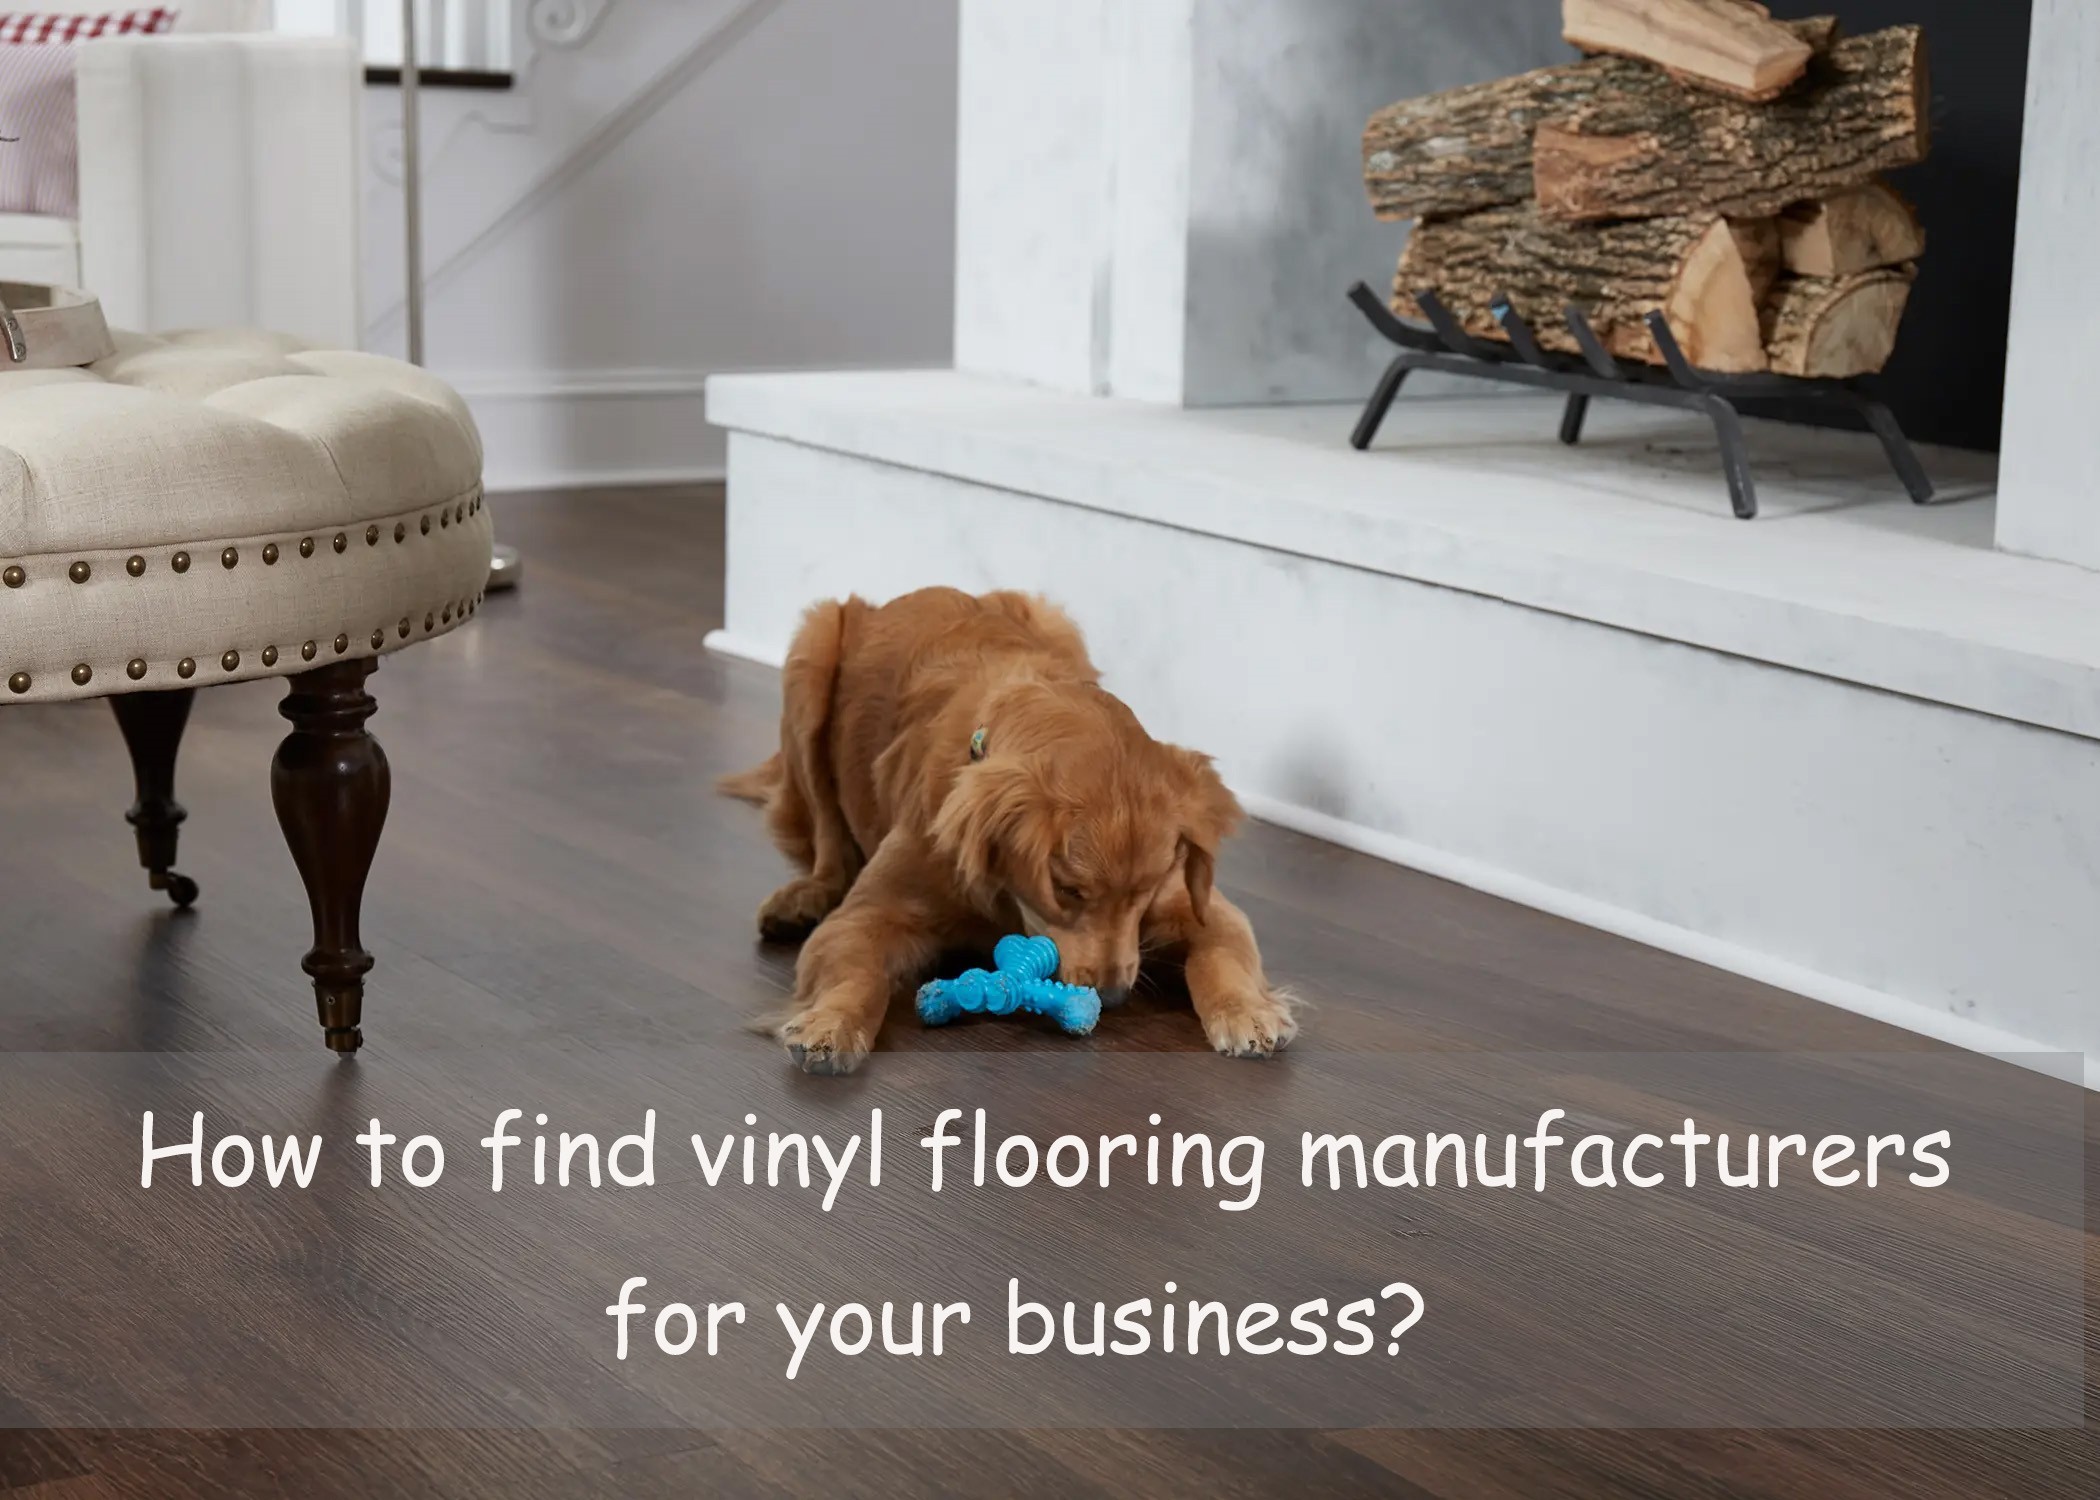 How to Find Vinyl Flooring Manufacturers for your Business